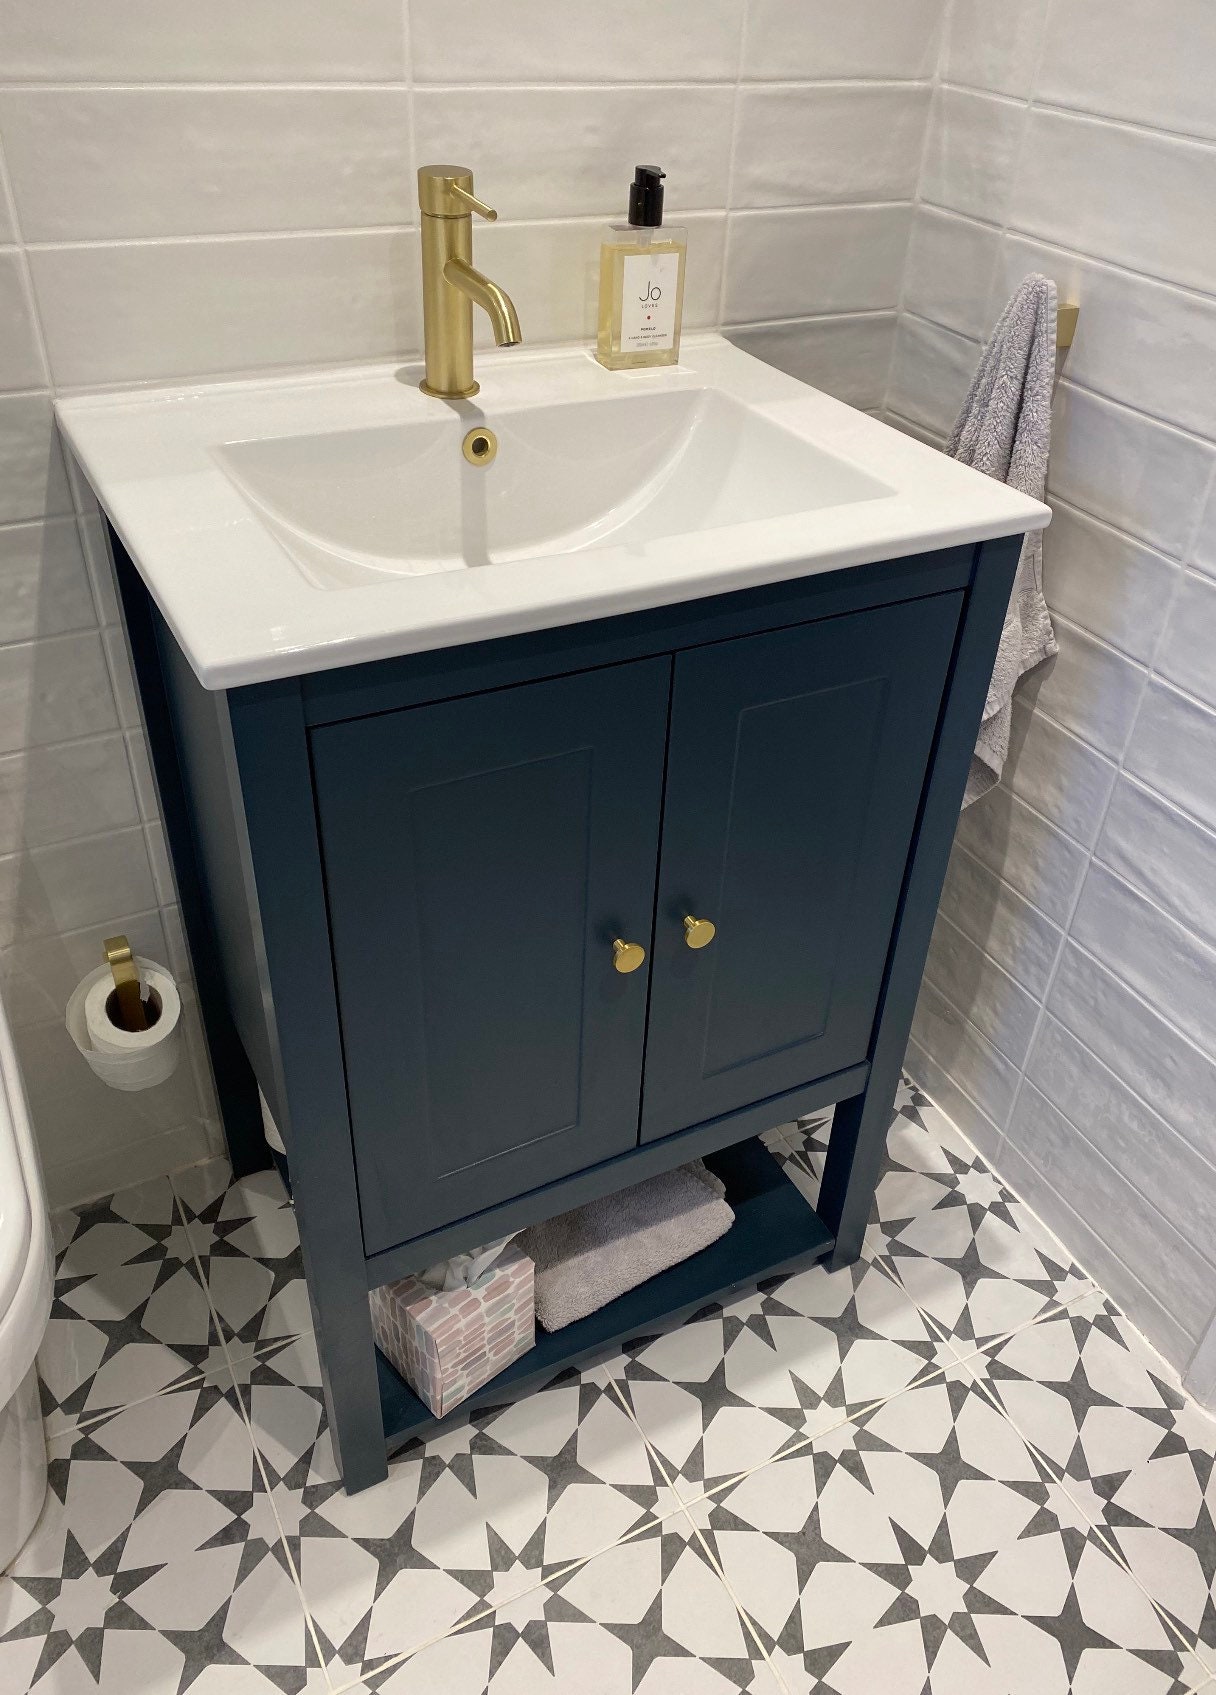 Vanity Unit With Doors Painted in Farrow & Ball. Ceramic Sink. - Etsy